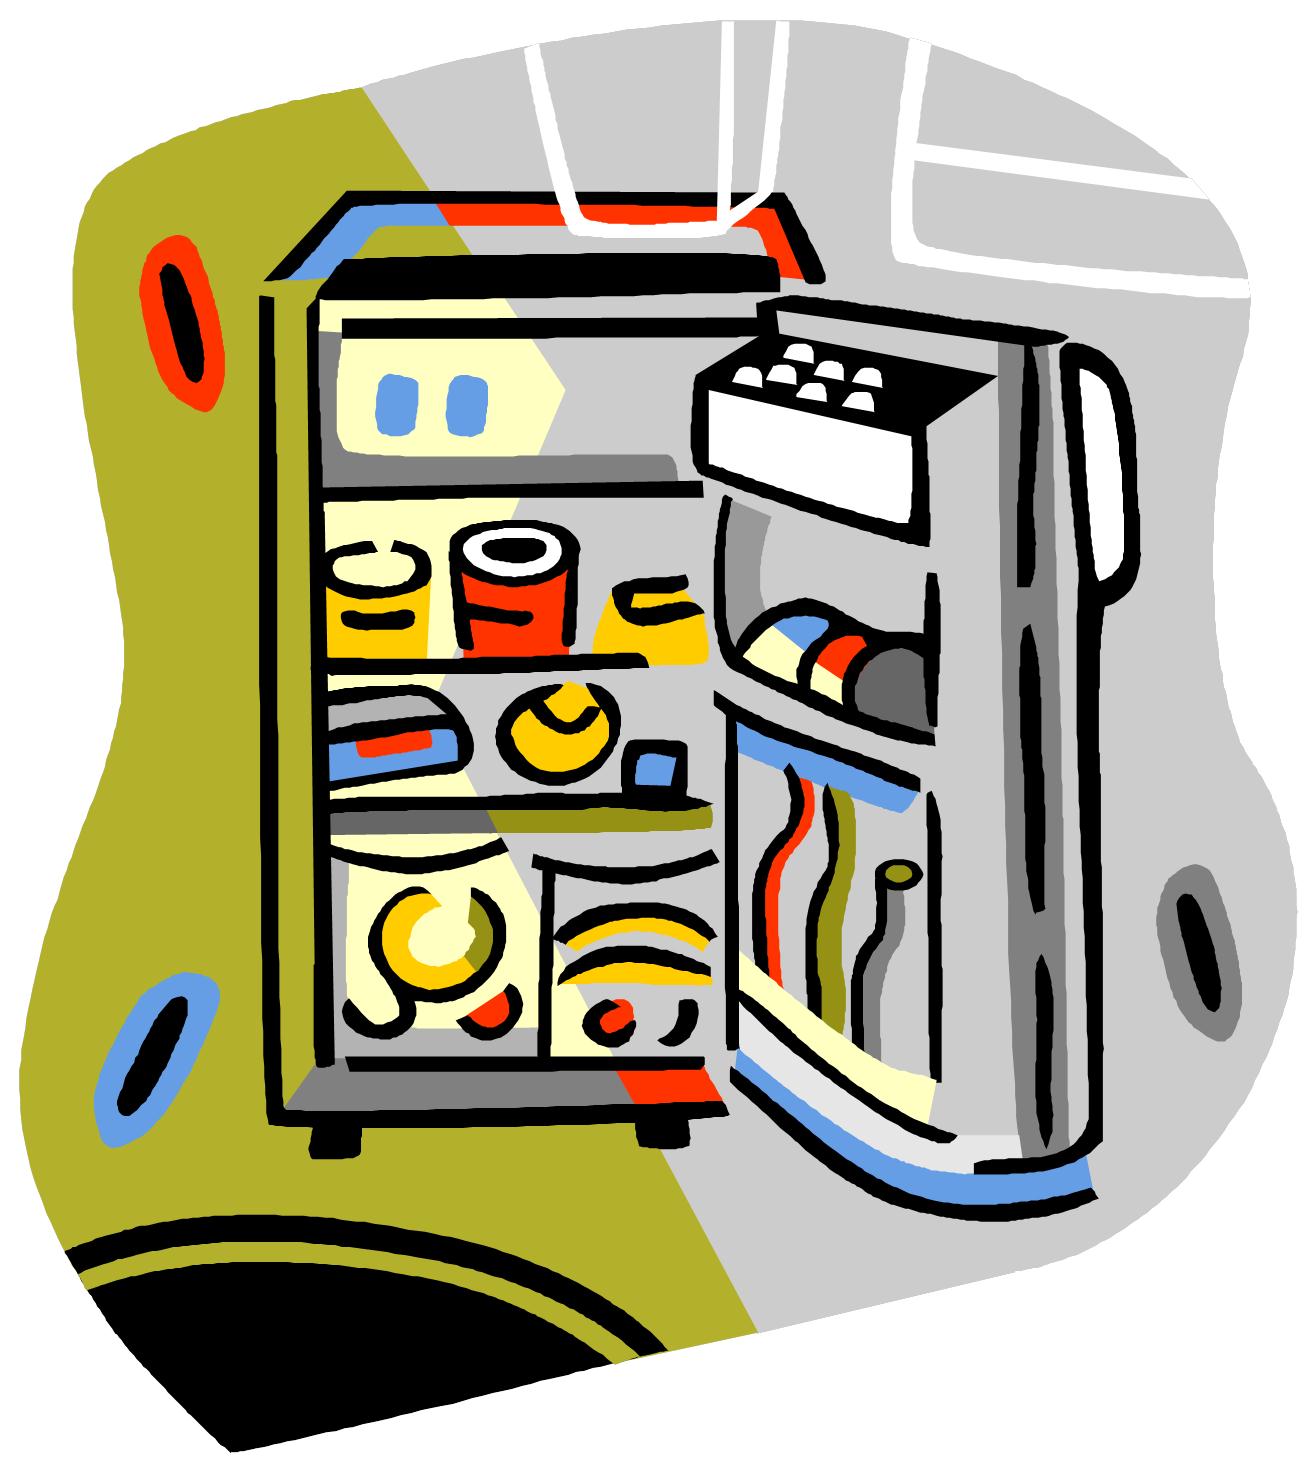 cleaning fridge clipart - photo #36